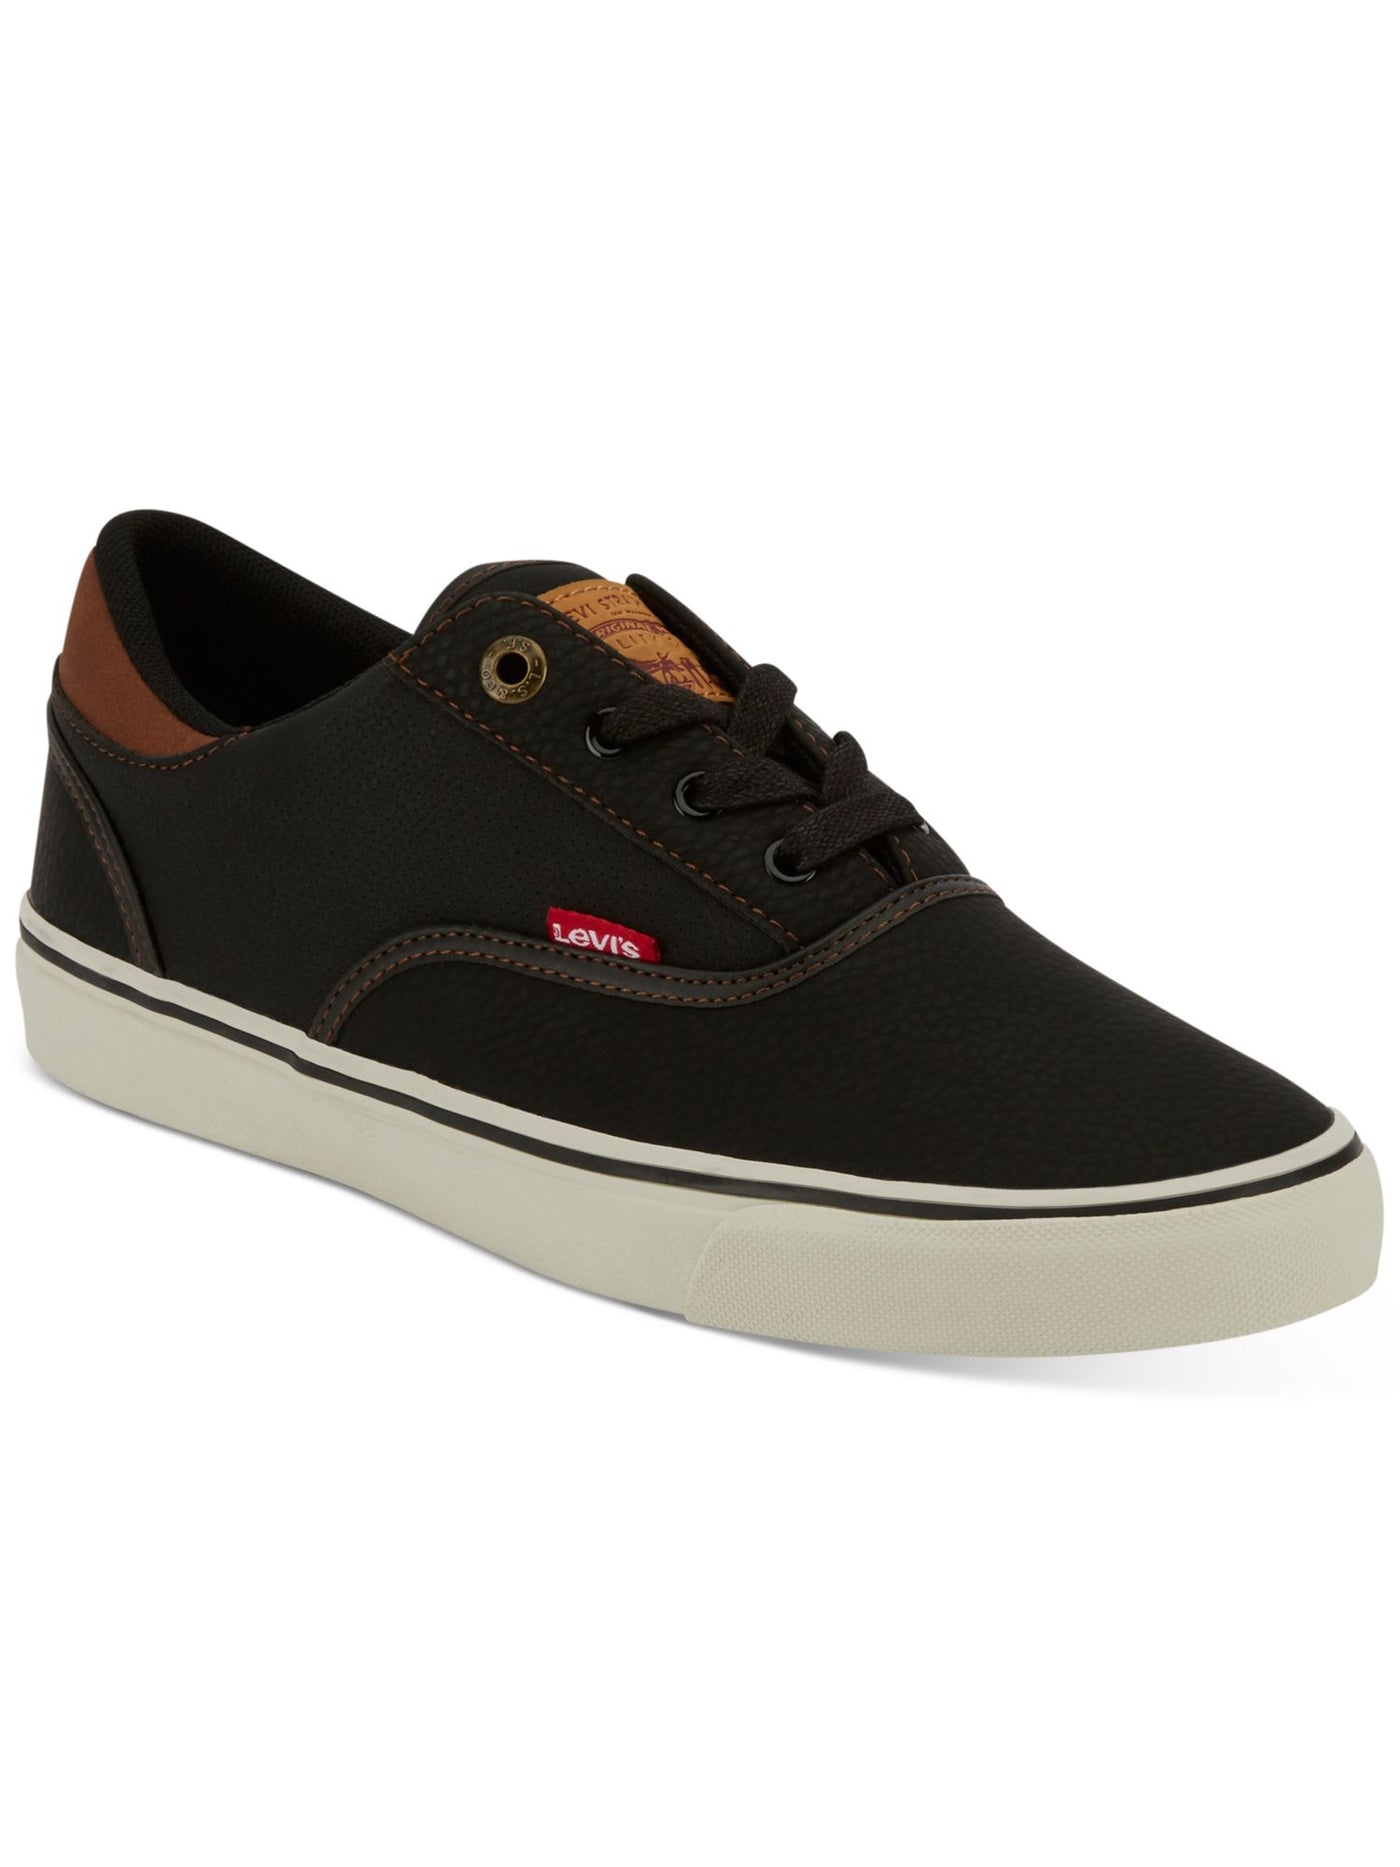 LEVI'S Mens Black Cushioned Comfort Ethan Round Toe Lace-Up Sneakers Shoes 7